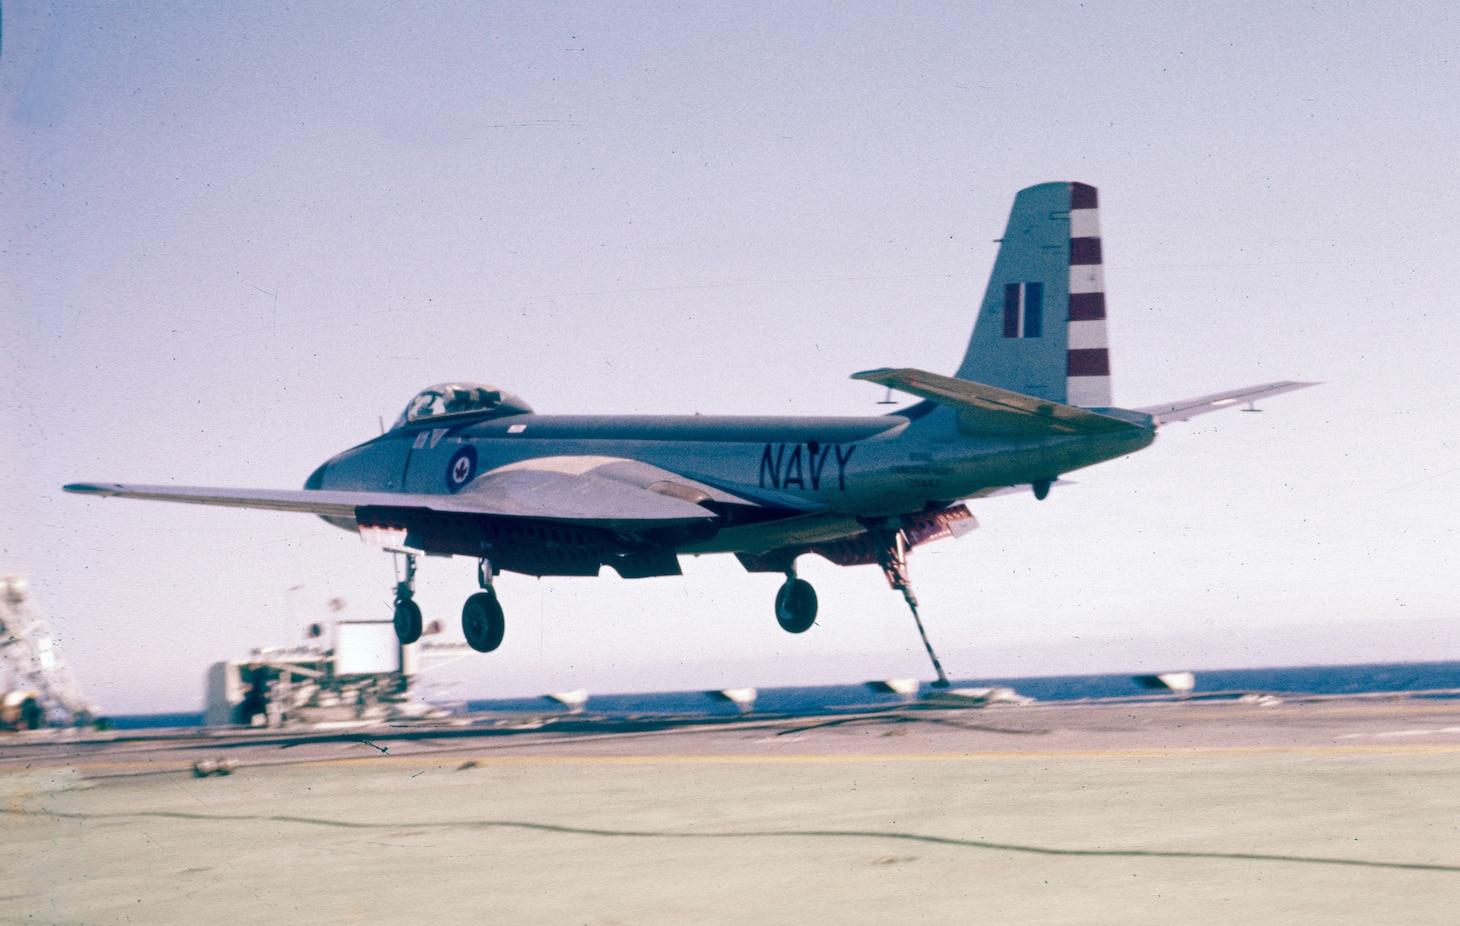 A VF-871 F2H-3 comes aboard the HMCS Bonaventure (CVL 22) in 1958. In March 1959, this squadron merged with VF-870 when attrition made a single squadron more practical.